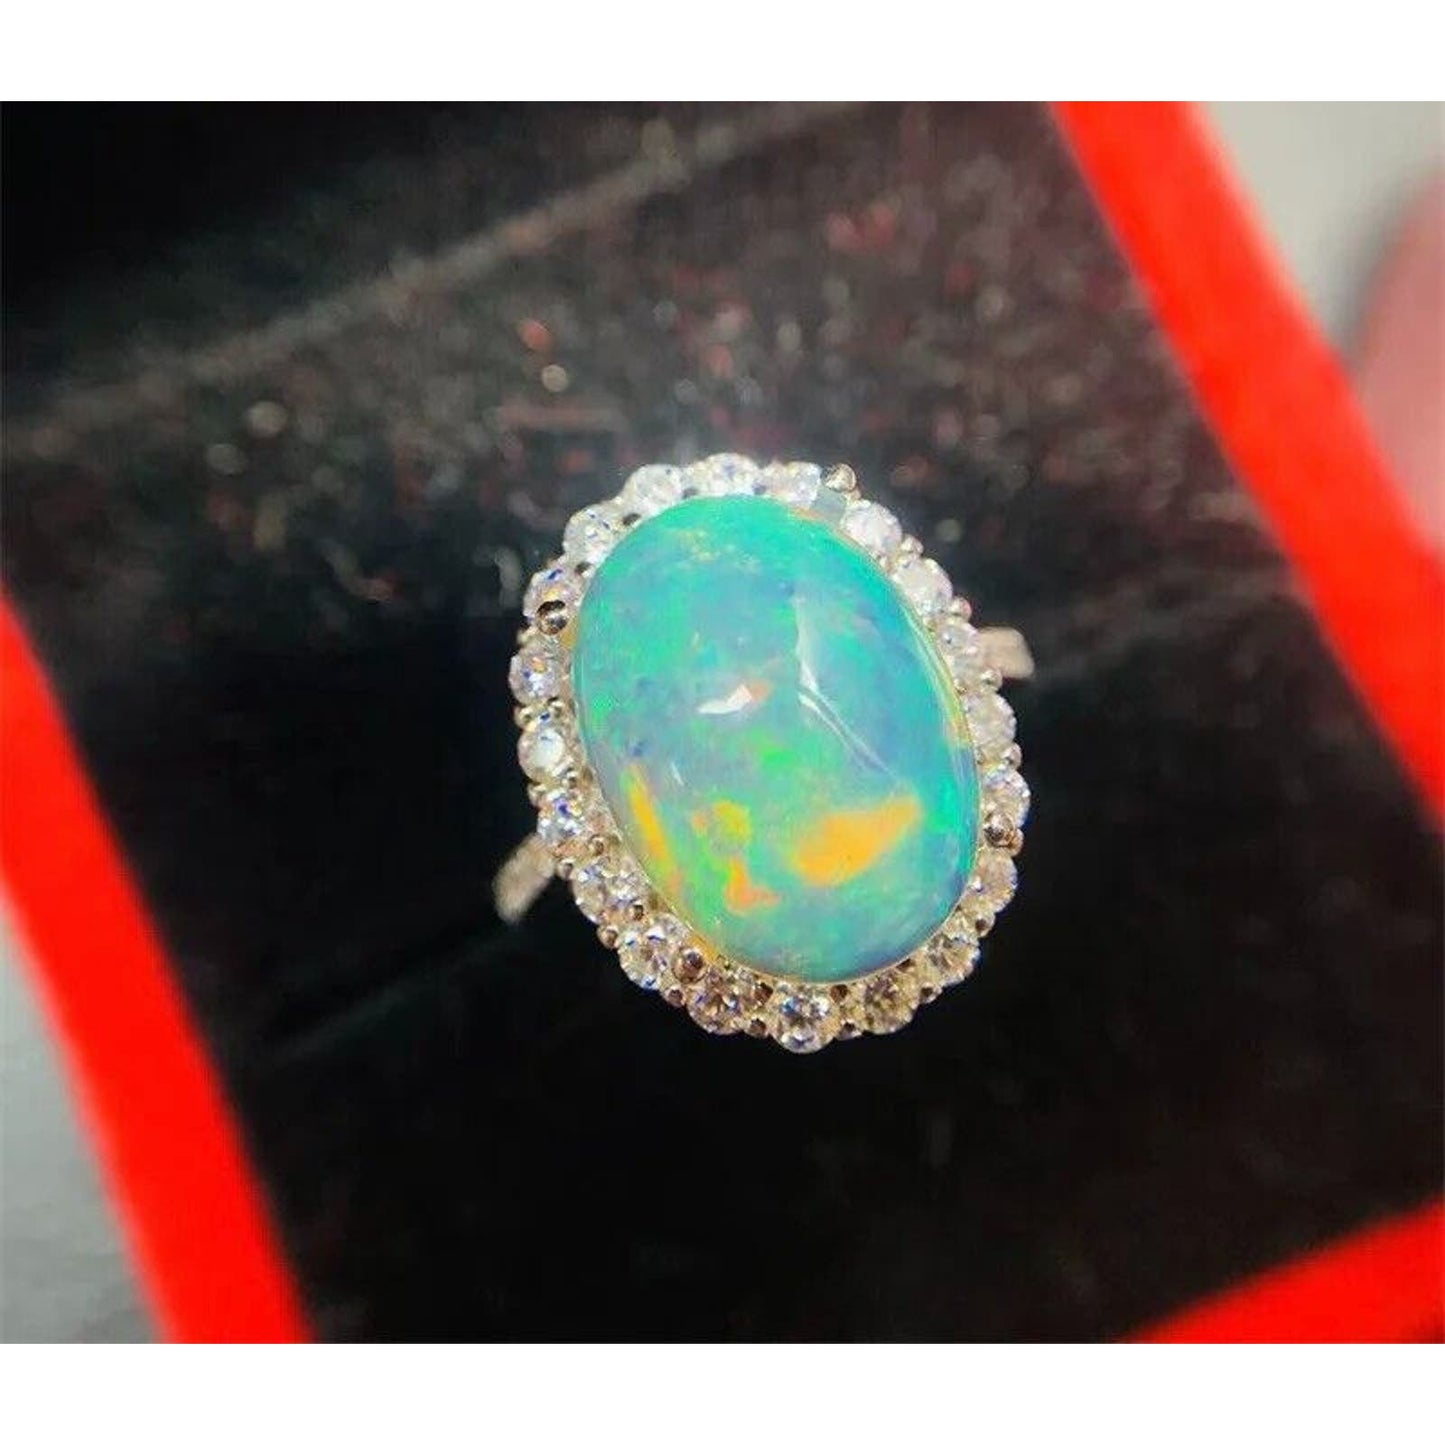 Large Fire Opal Statement Ring 10x14mm Sterling Silver